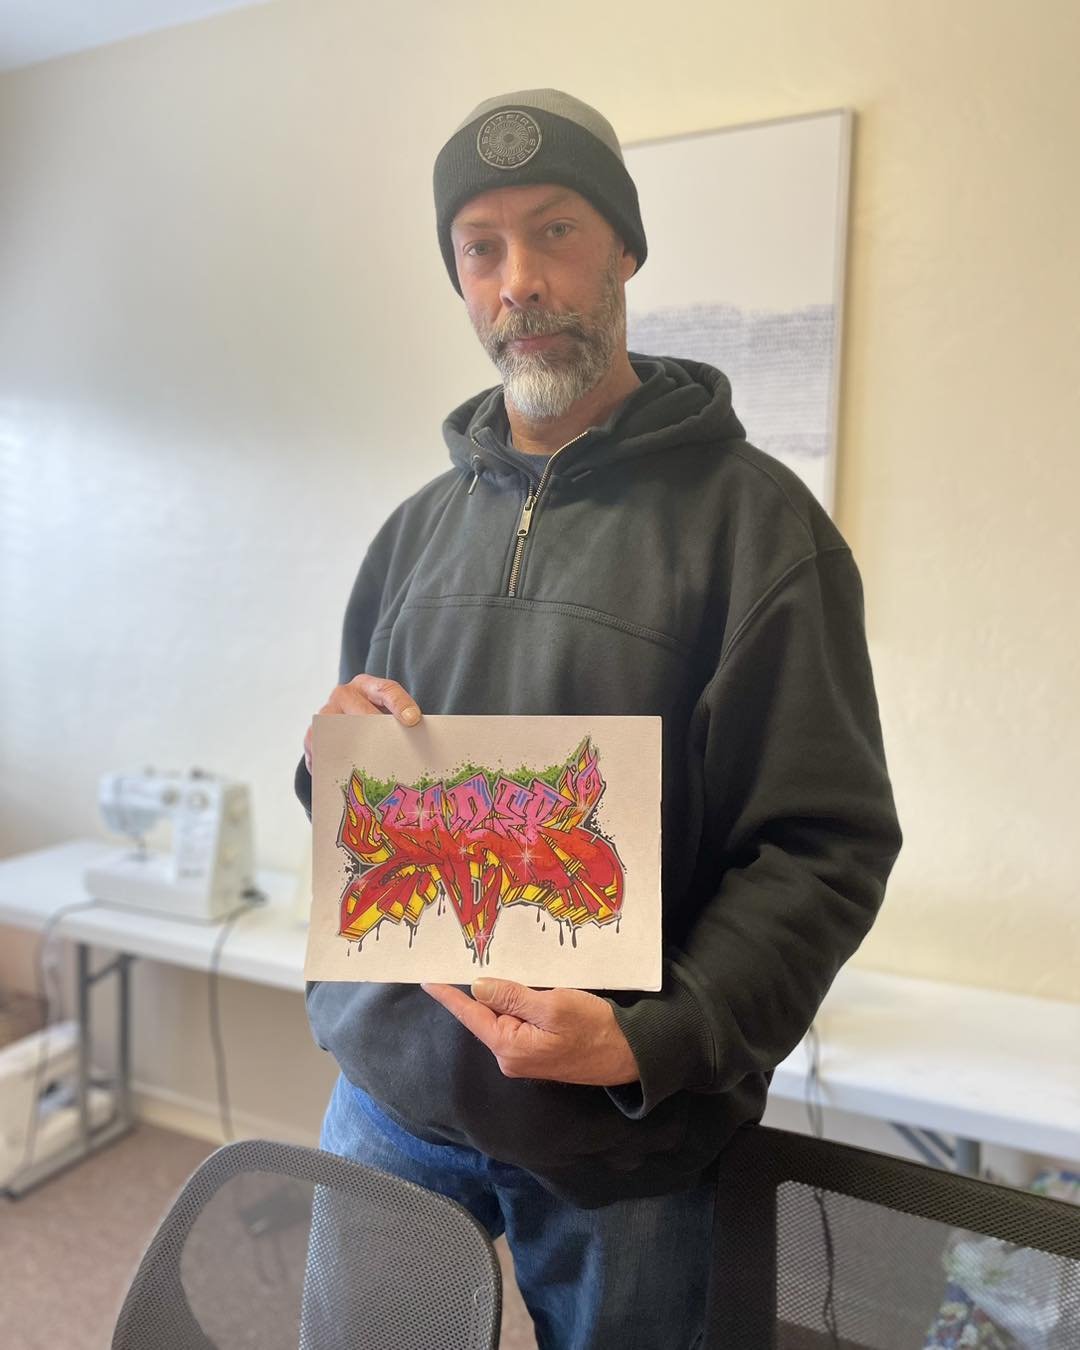 Our spring semester in the R3 program at the Eugene Mission is in full swing and we have some amazing new artwork to show you, courtesy of a popular art class with volunteer Dan.
 
Guest Jesse showed off his work today and said he hopes to paint a fu